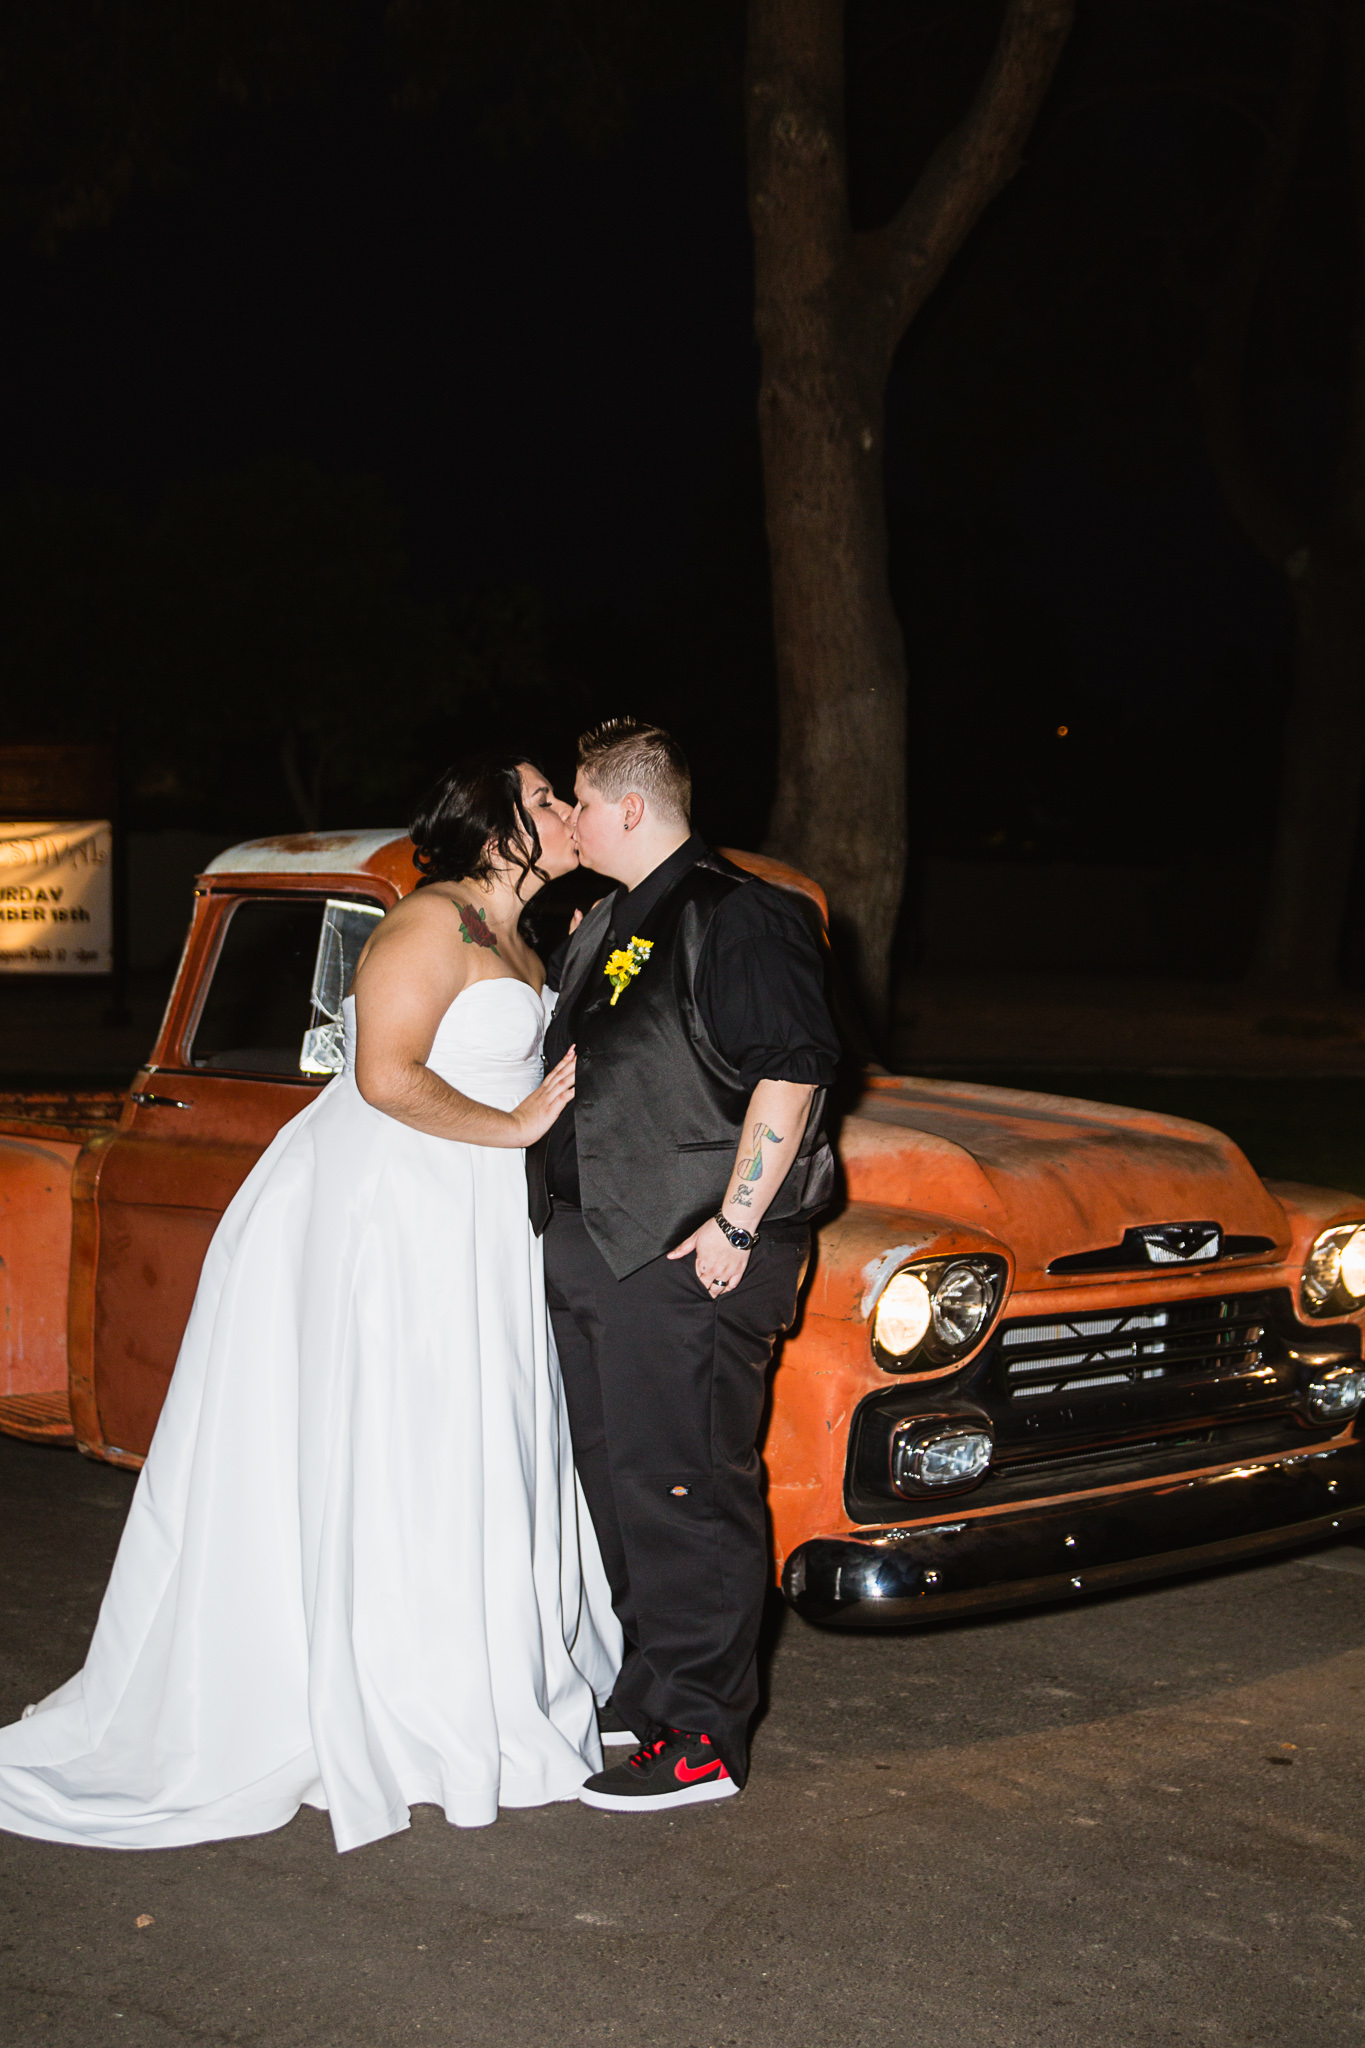 Same sex couple kissing at night in front of vintage orange truck.